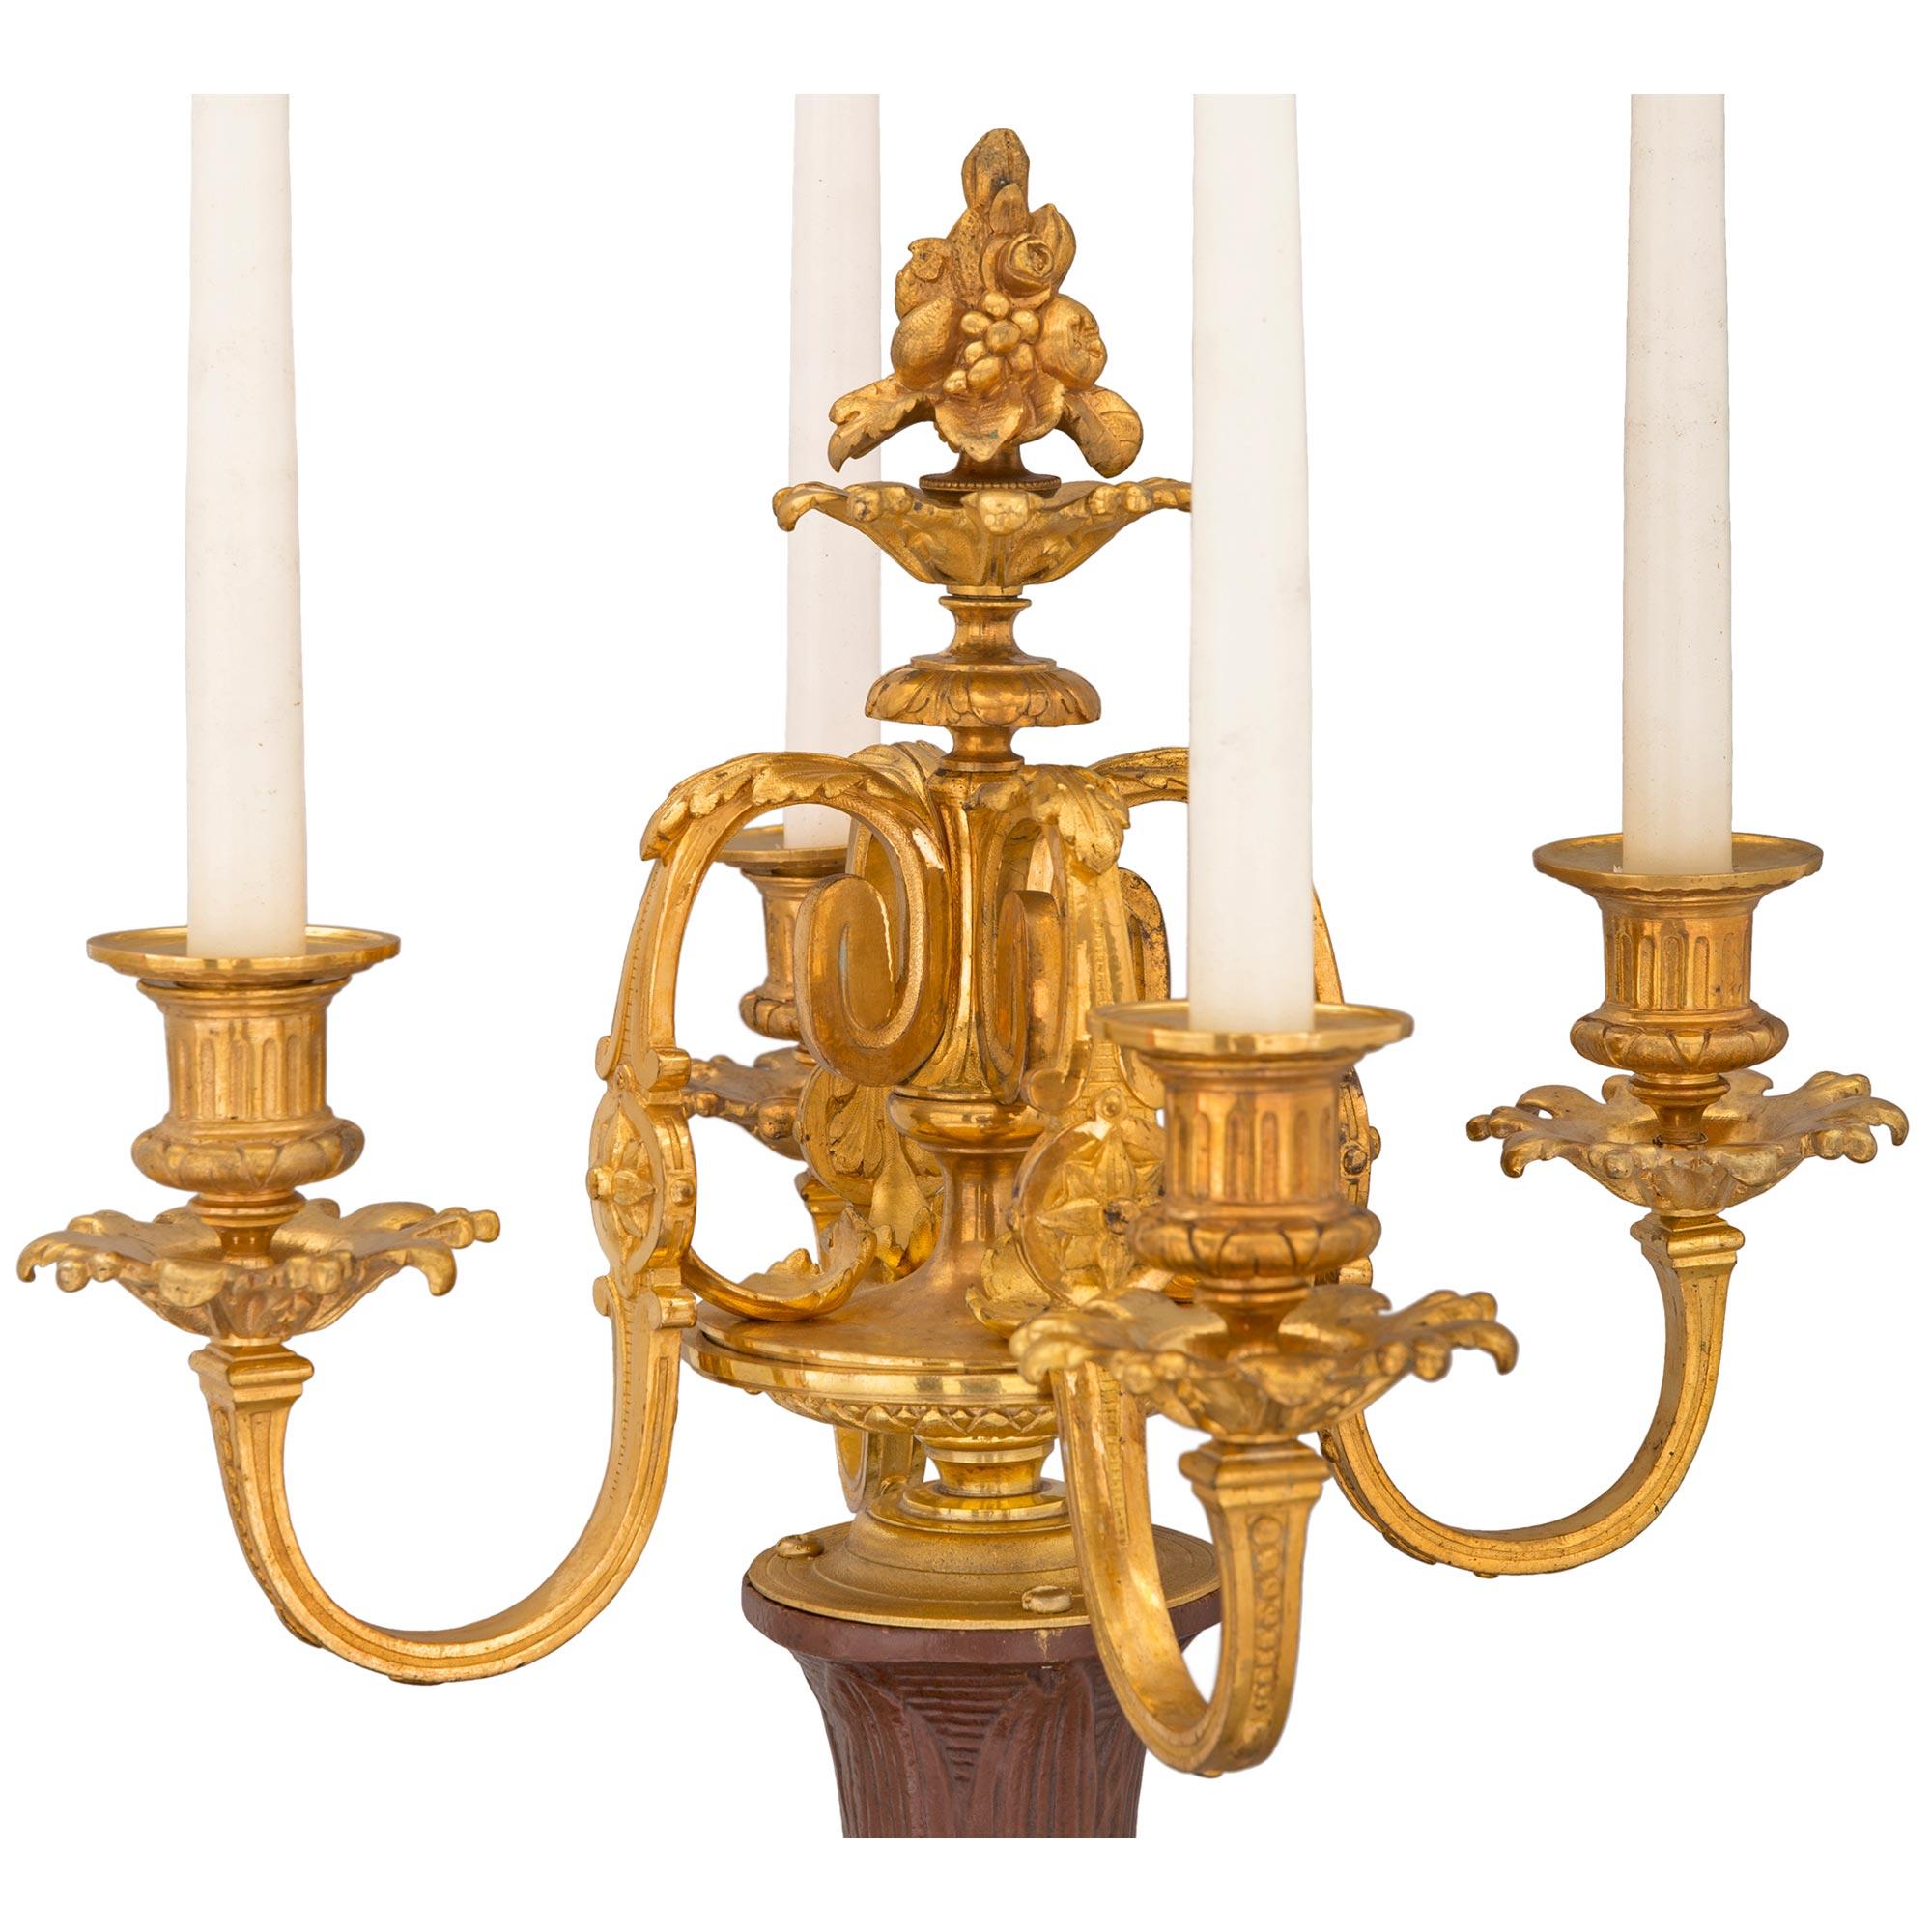 Pair of French Mid-19th Century Patinated Bronze and Ormolu Candelabra Statues For Sale 1